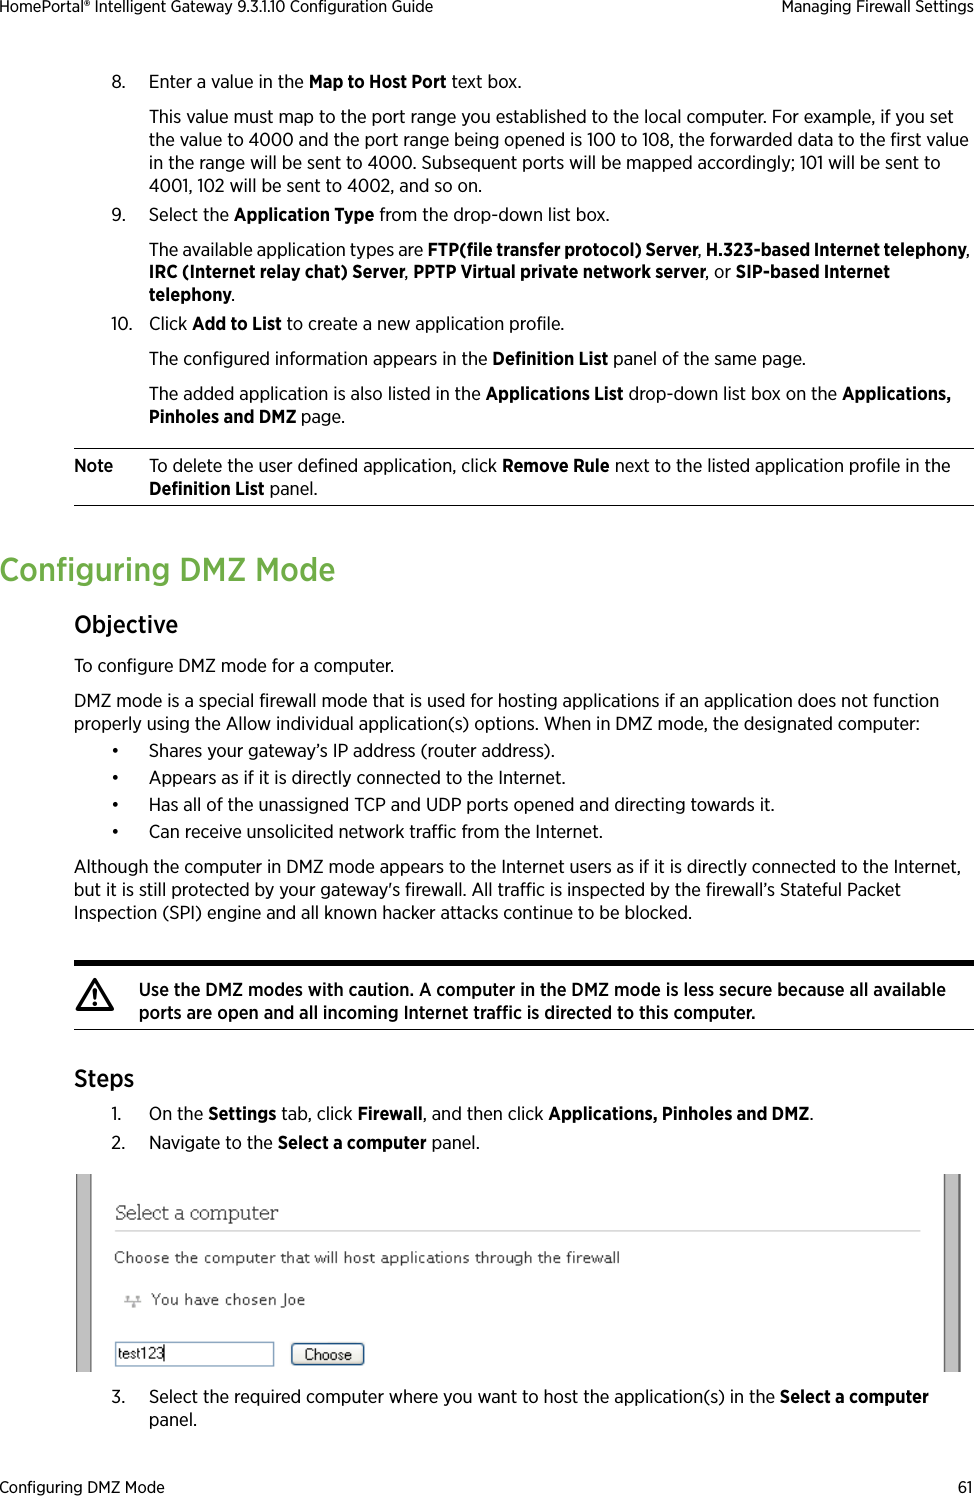 Configuring DMZ Mode 61HomePortal® Intelligent Gateway 9.3.1.10 Configuration Guide Managing Firewall Settings8. Enter a value in the Map to Host Port text box. This value must map to the port range you established to the local computer. For example, if you set the value to 4000 and the port range being opened is 100 to 108, the forwarded data to the first value in the range will be sent to 4000. Subsequent ports will be mapped accordingly; 101 will be sent to 4001, 102 will be sent to 4002, and so on.9. Select the Application Type from the drop-down list box.The available application types are FTP(file transfer protocol) Server, H.323-based Internet telephony, IRC (Internet relay chat) Server, PPTP Virtual private network server, or SIP-based Internet telephony.10. Click Add to List to create a new application profile.The configured information appears in the Definition List panel of the same page.The added application is also listed in the Applications List drop-down list box on the Applications, Pinholes and DMZ page.Note To delete the user defined application, click Remove Rule next to the listed application profile in the Definition List panel.Configuring DMZ ModeObjectiveTo configure DMZ mode for a computer. DMZ mode is a special firewall mode that is used for hosting applications if an application does not function properly using the Allow individual application(s) options. When in DMZ mode, the designated computer:• Shares your gateway’s IP address (router address).• Appears as if it is directly connected to the Internet.• Has all of the unassigned TCP and UDP ports opened and directing towards it.• Can receive unsolicited network traffic from the Internet.Although the computer in DMZ mode appears to the Internet users as if it is directly connected to the Internet, but it is still protected by your gateway&apos;s firewall. All traffic is inspected by the firewall’s Stateful Packet Inspection (SPI) engine and all known hacker attacks continue to be blocked.Steps1. On the Settings tab, click Firewall, and then click Applications, Pinholes and DMZ.2. Navigate to the Select a computer panel.3. Select the required computer where you want to host the application(s) in the Select a computer panel.mUse the DMZ modes with caution. A computer in the DMZ mode is less secure because all available ports are open and all incoming Internet traffic is directed to this computer.